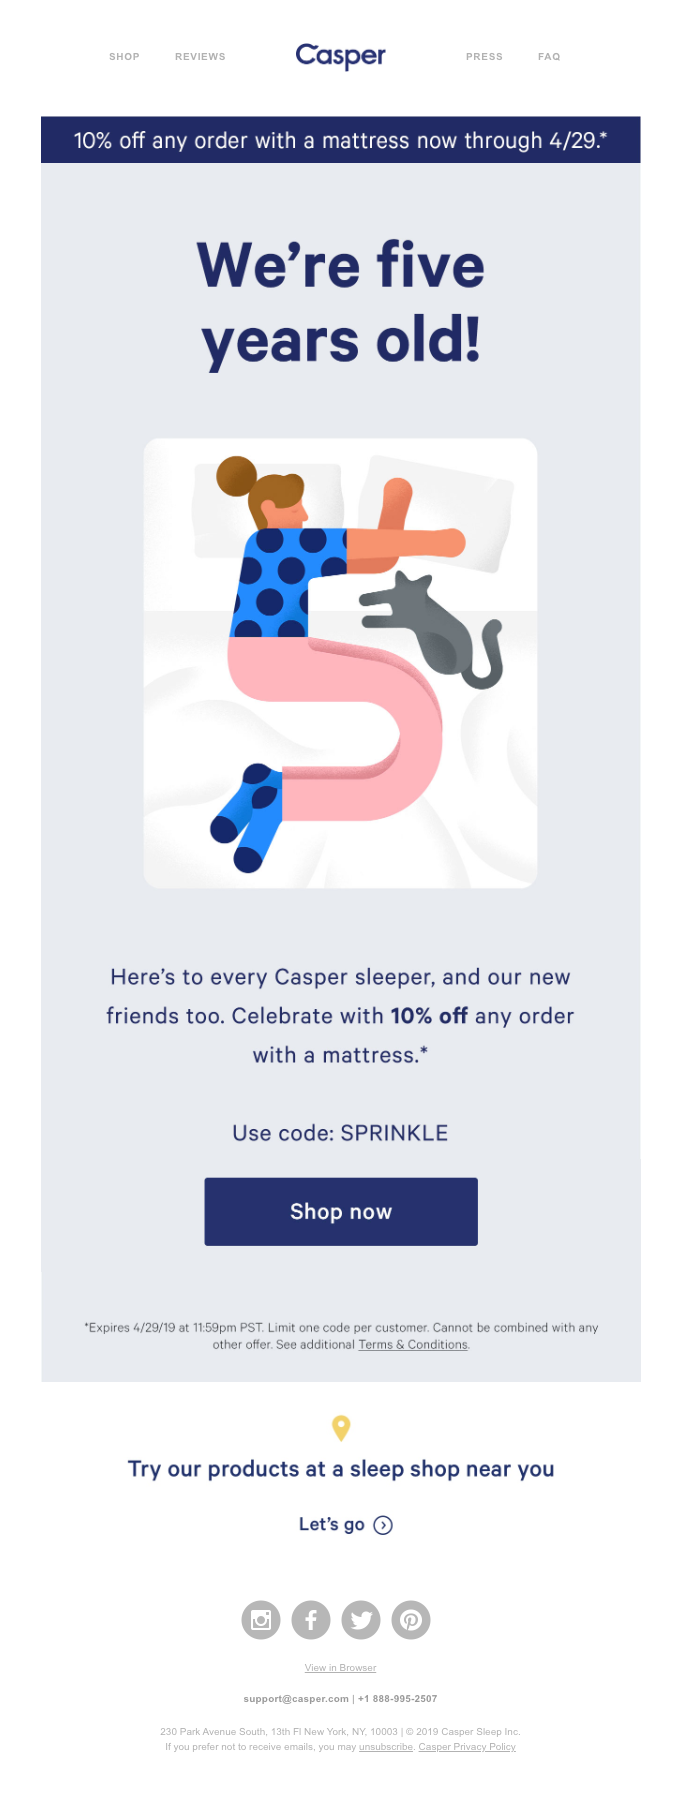 A milestone email with a 10% discount coupon by Casper